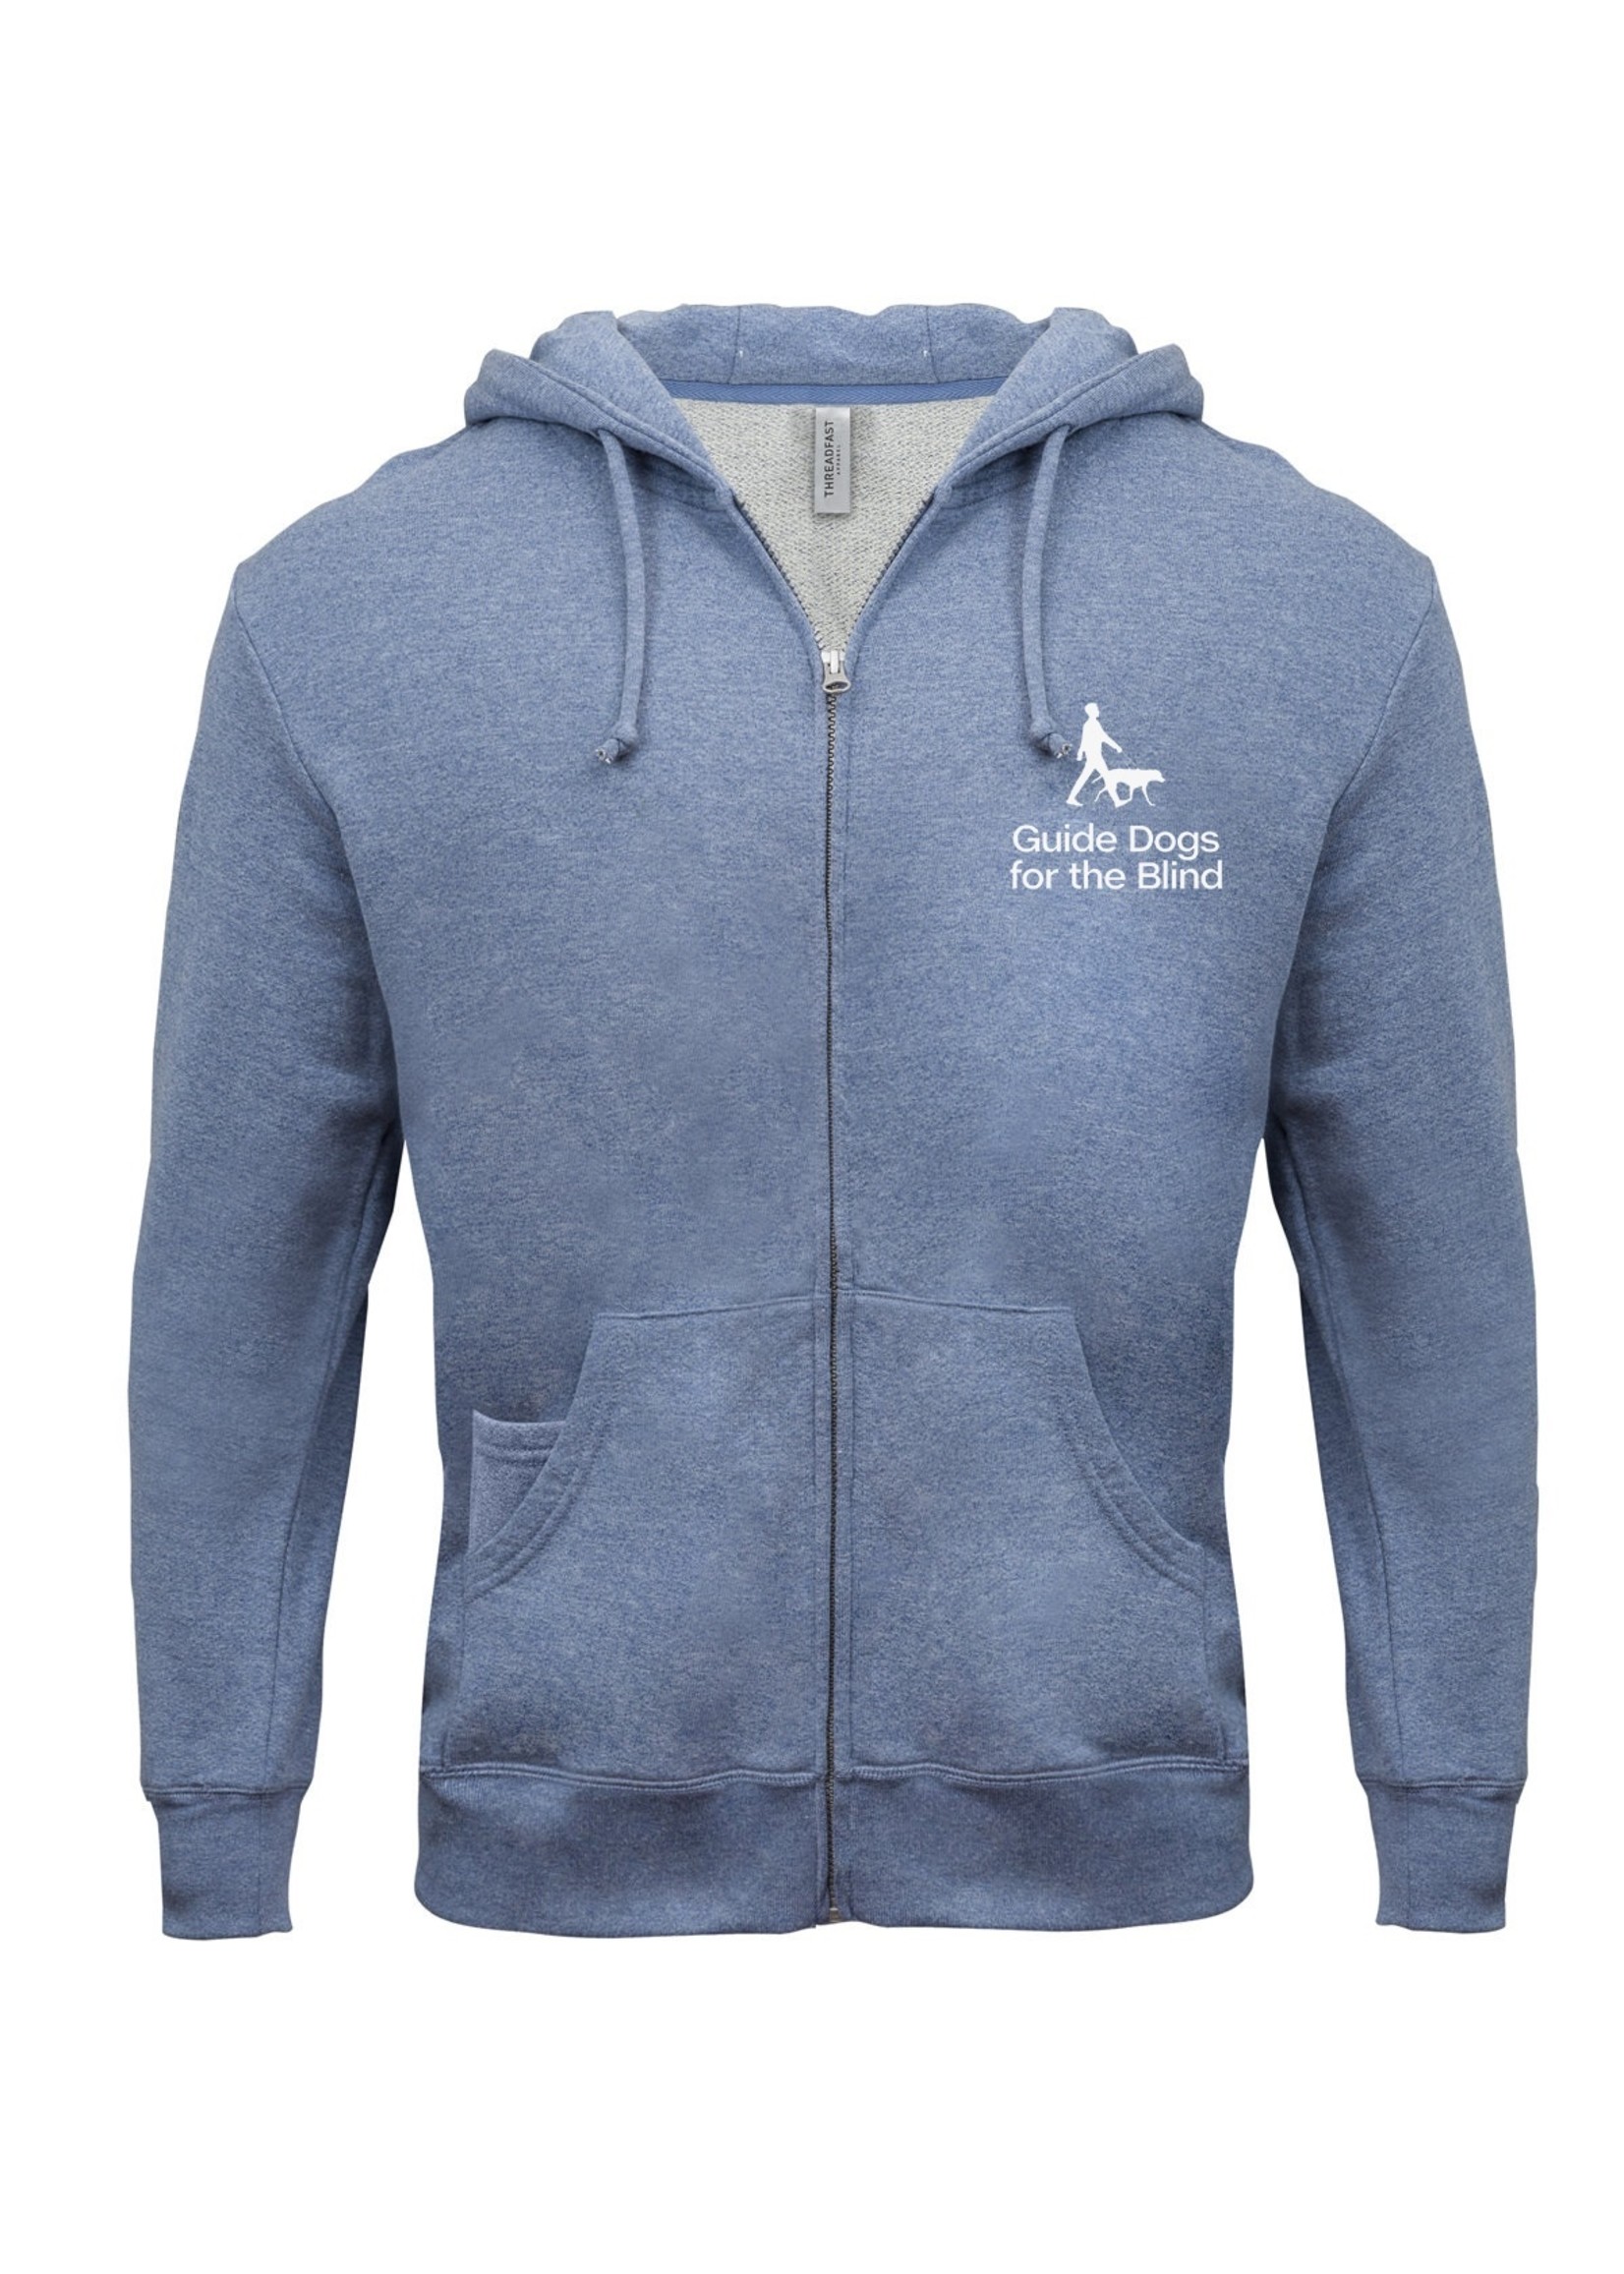 Adult Relaxed Fit Life is Better Zip Hoodie